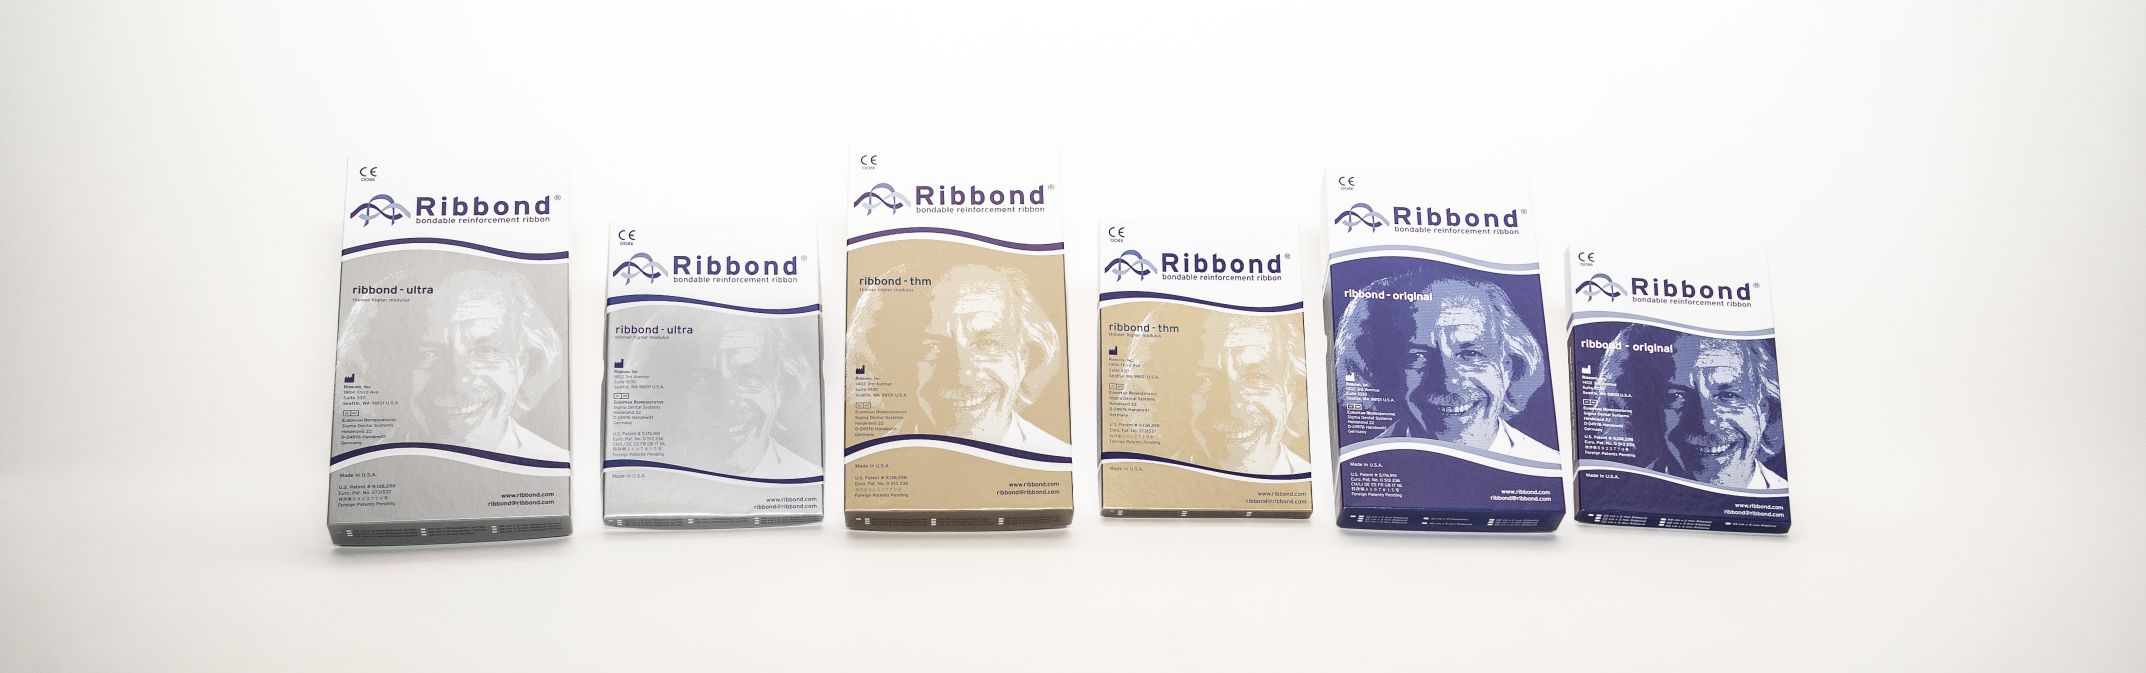 Ribbond Products